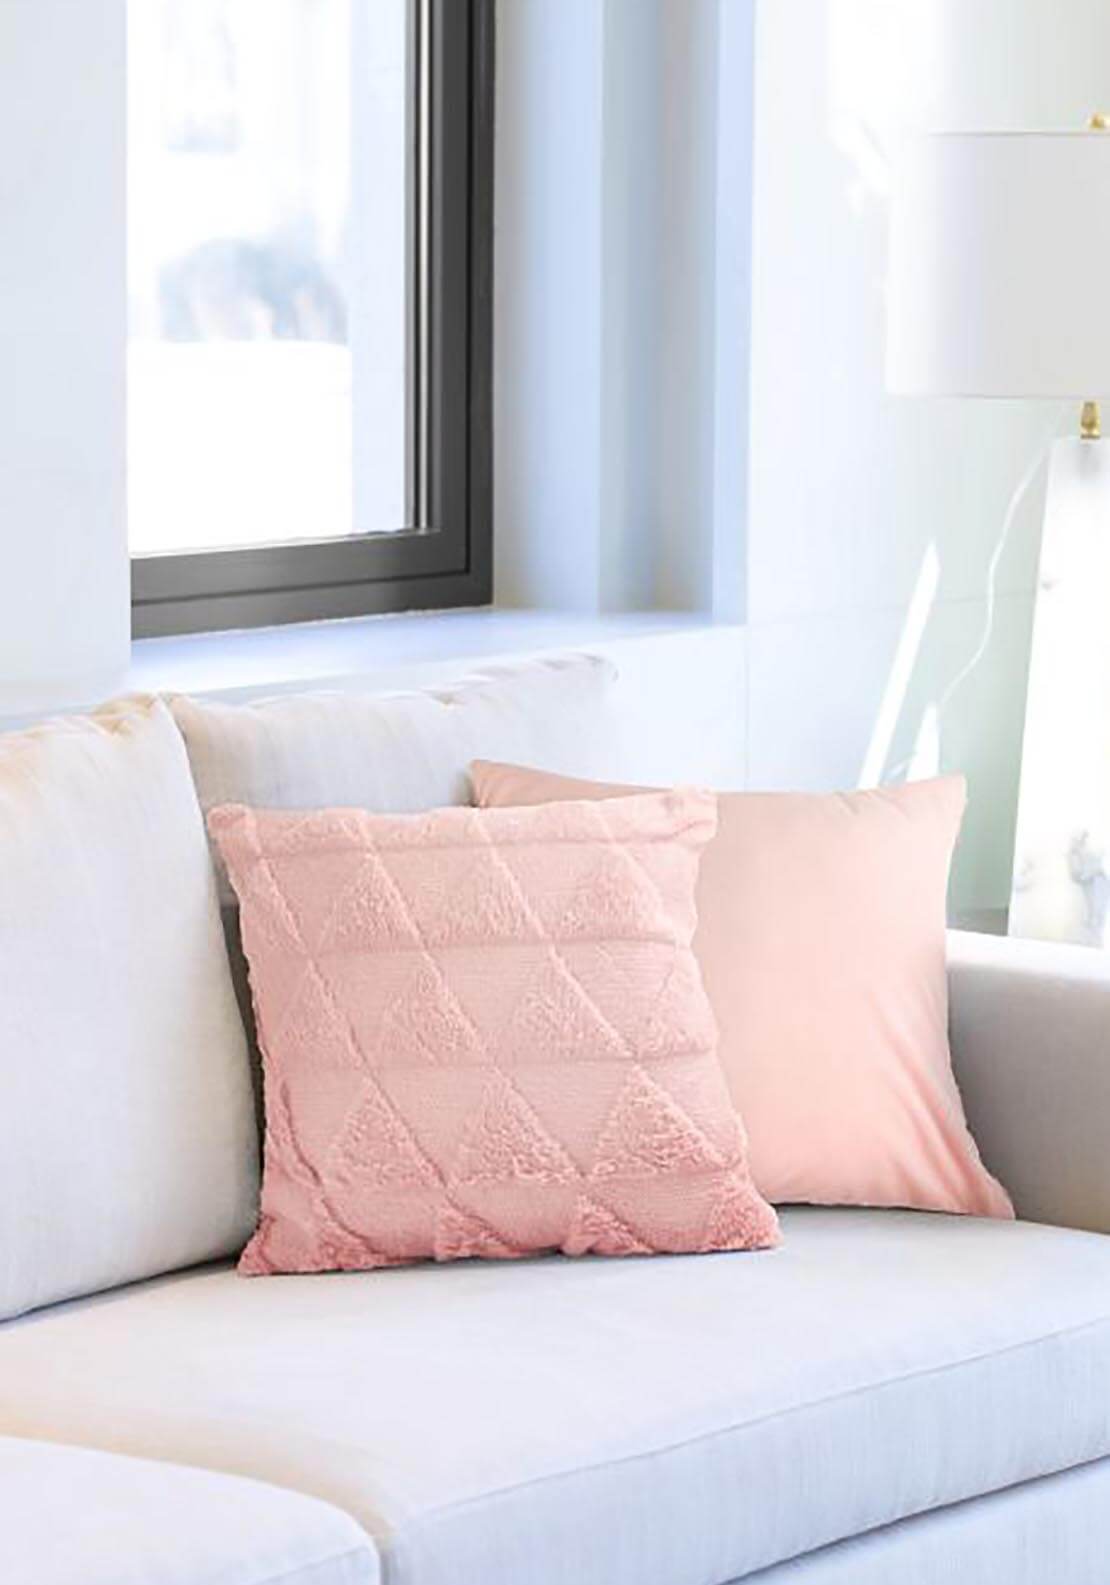 The Home Collection Nyla Cushion - Blush Pink 1 Shaws Department Stores